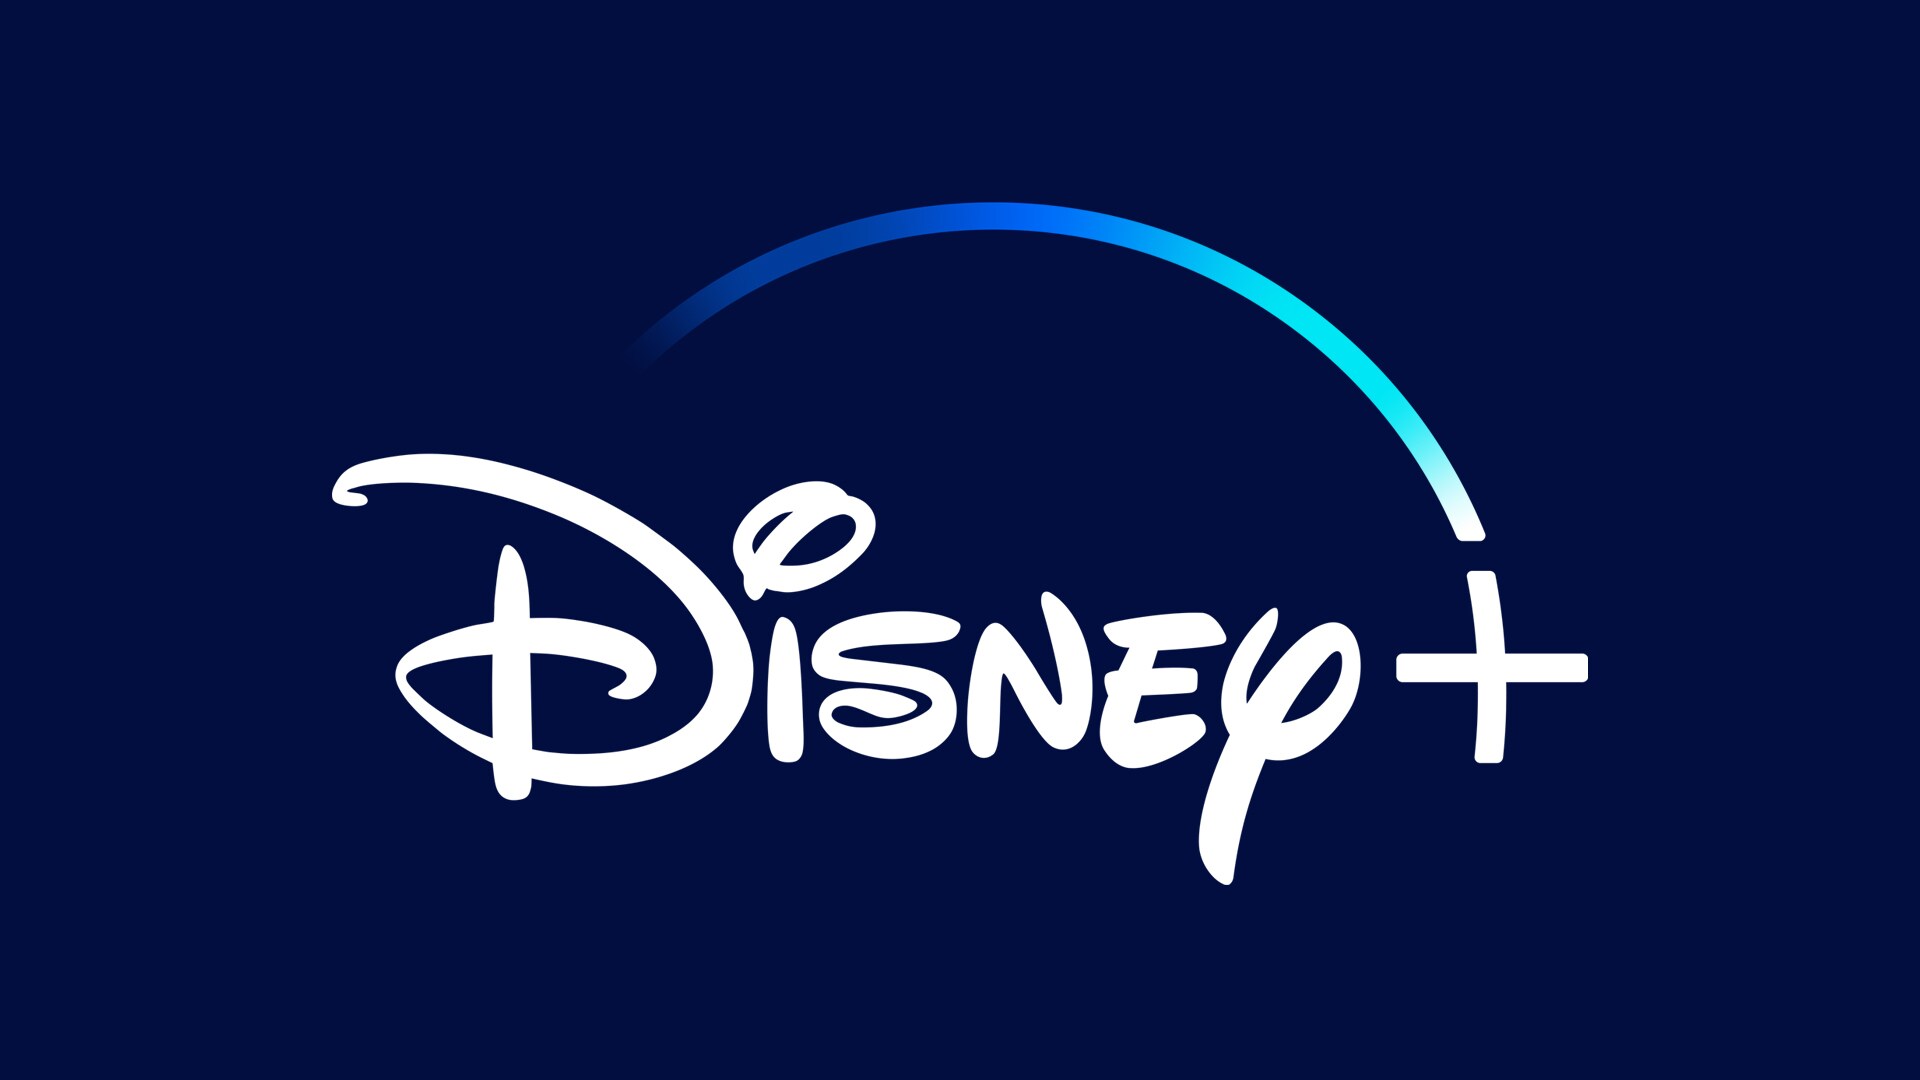 Ad-Supported Disney+ Subscription Tier To Launch In The U.S. On December 8